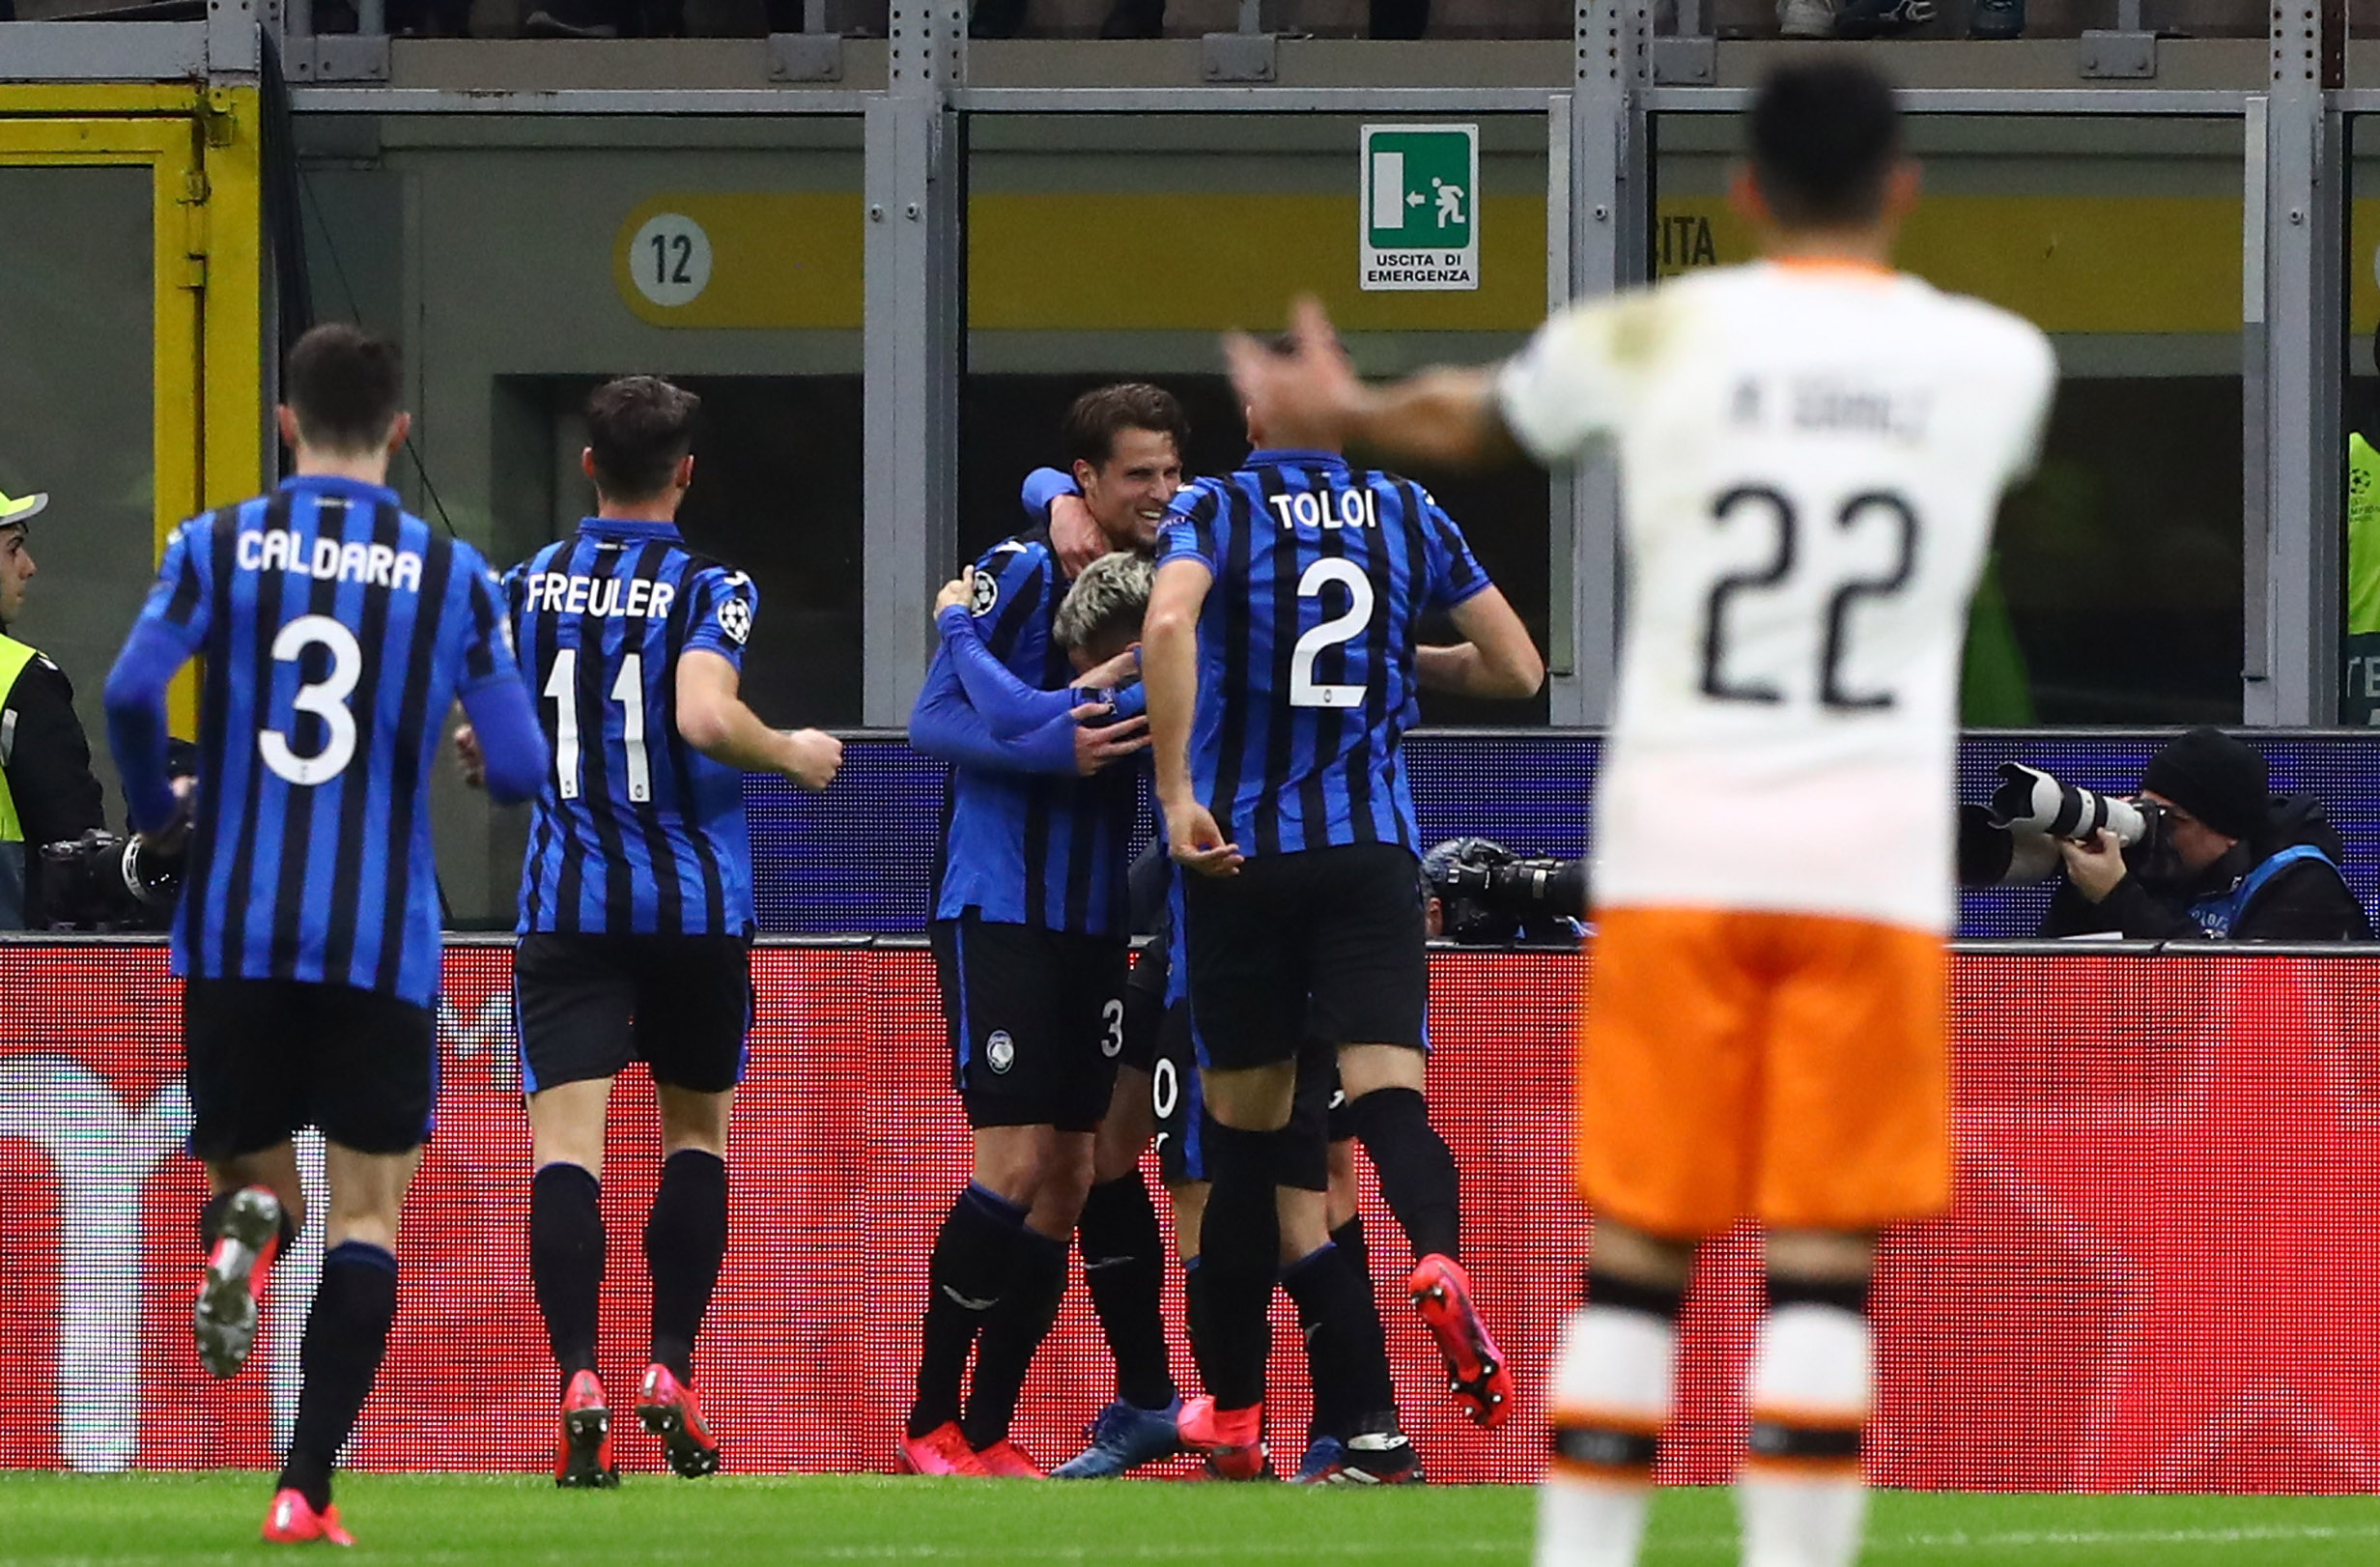 MILAN, ITALY - FEBRUARY 19:  Hans Hateboer of Atalanta celebrates with his team-mates after scoring the opening goal during the UEFA Champions League round of 16 first leg match between Atalanta and Valencia CF at San Siro Stadium on February 19, 2020 in Milan, Italy.  (Photo by Marco Luzzani/Getty Images)